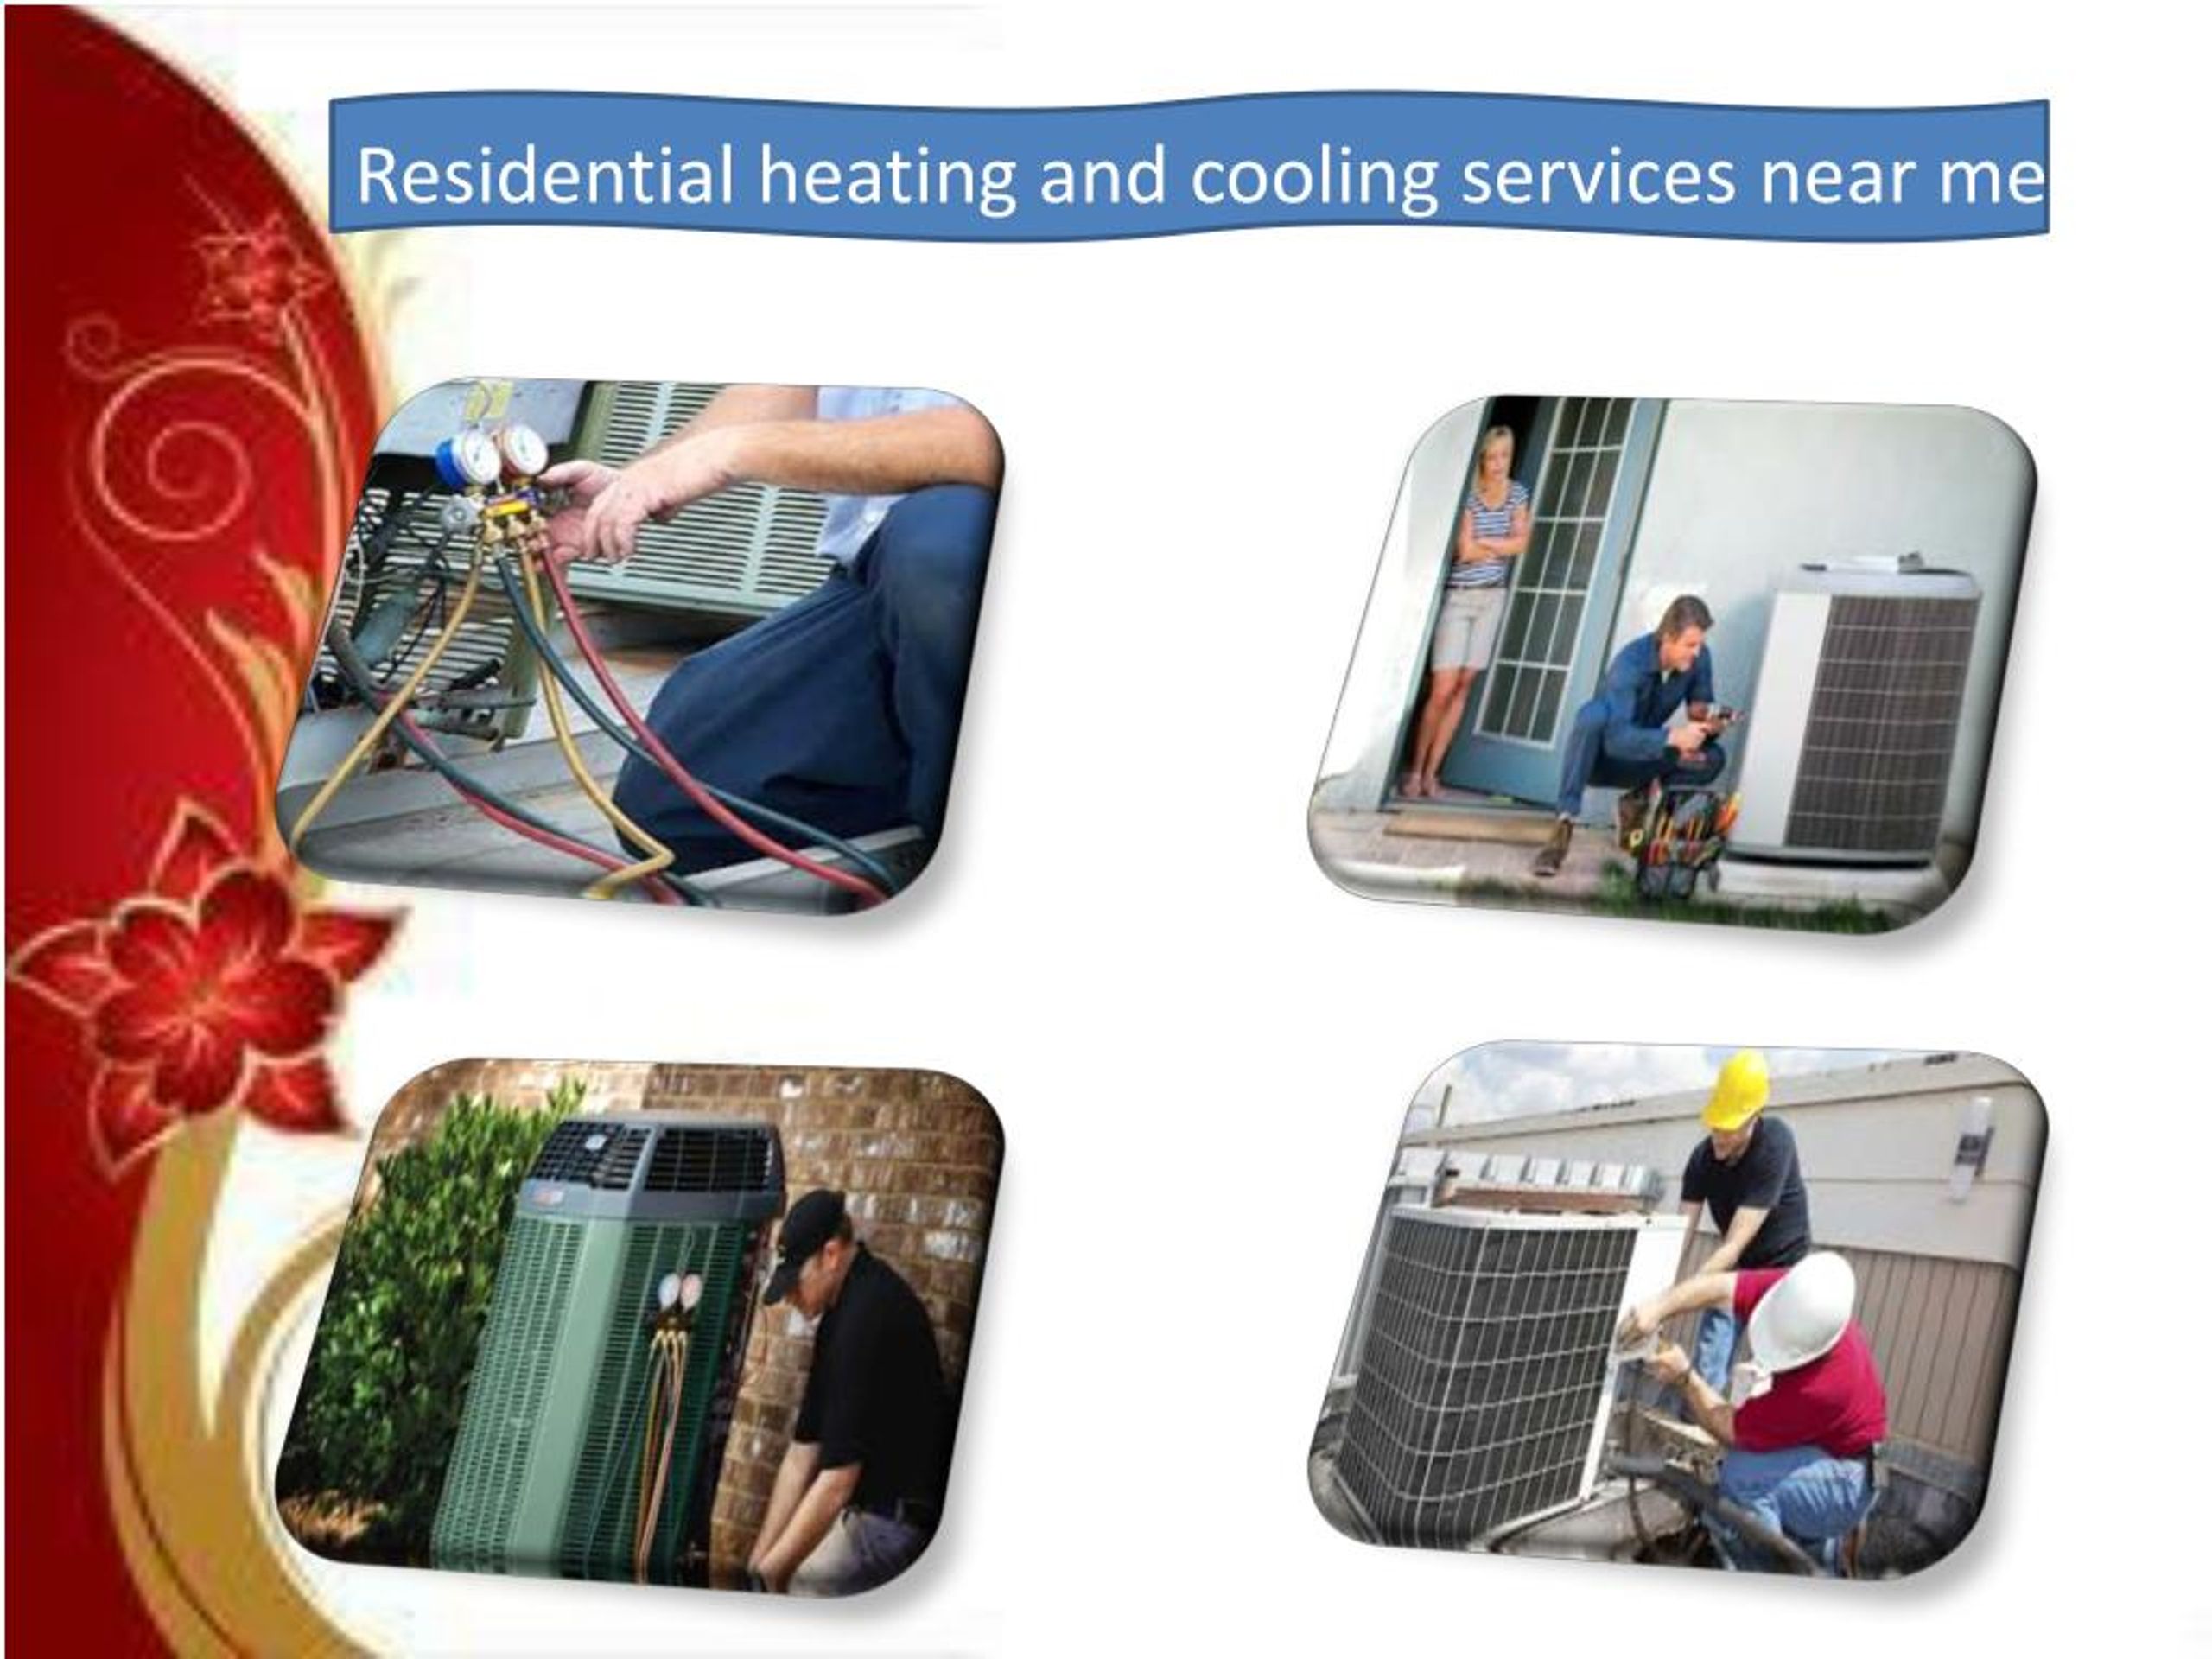 PPT - Residential heating and cooling services near me ...